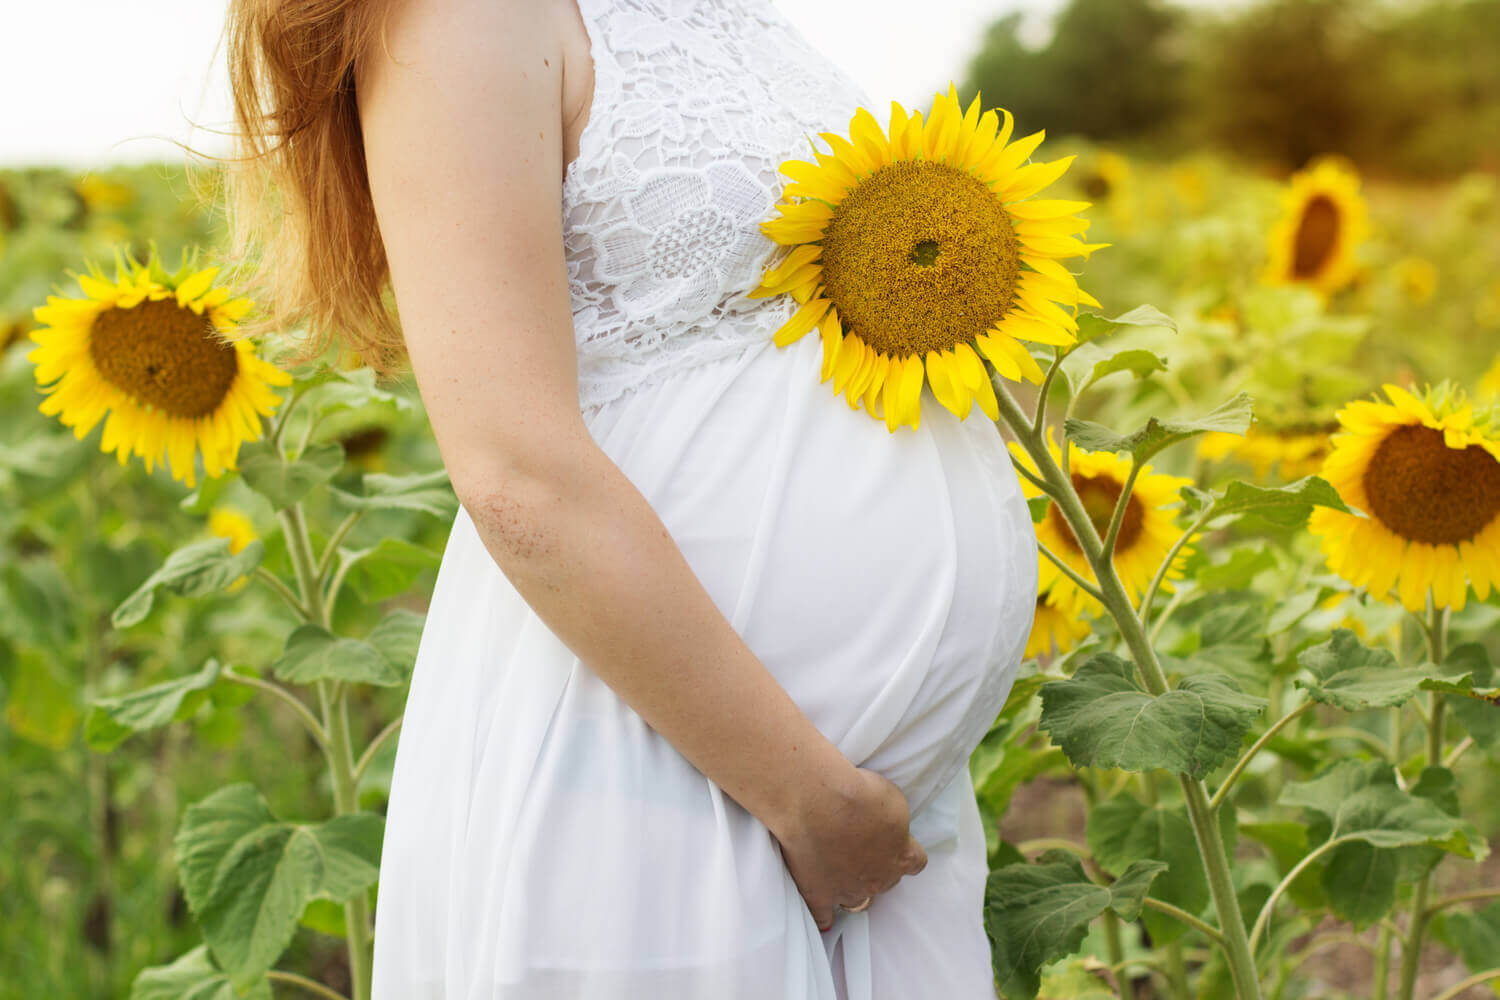 Is It Safe to Consume Sunflower Seeds During Pregnancy